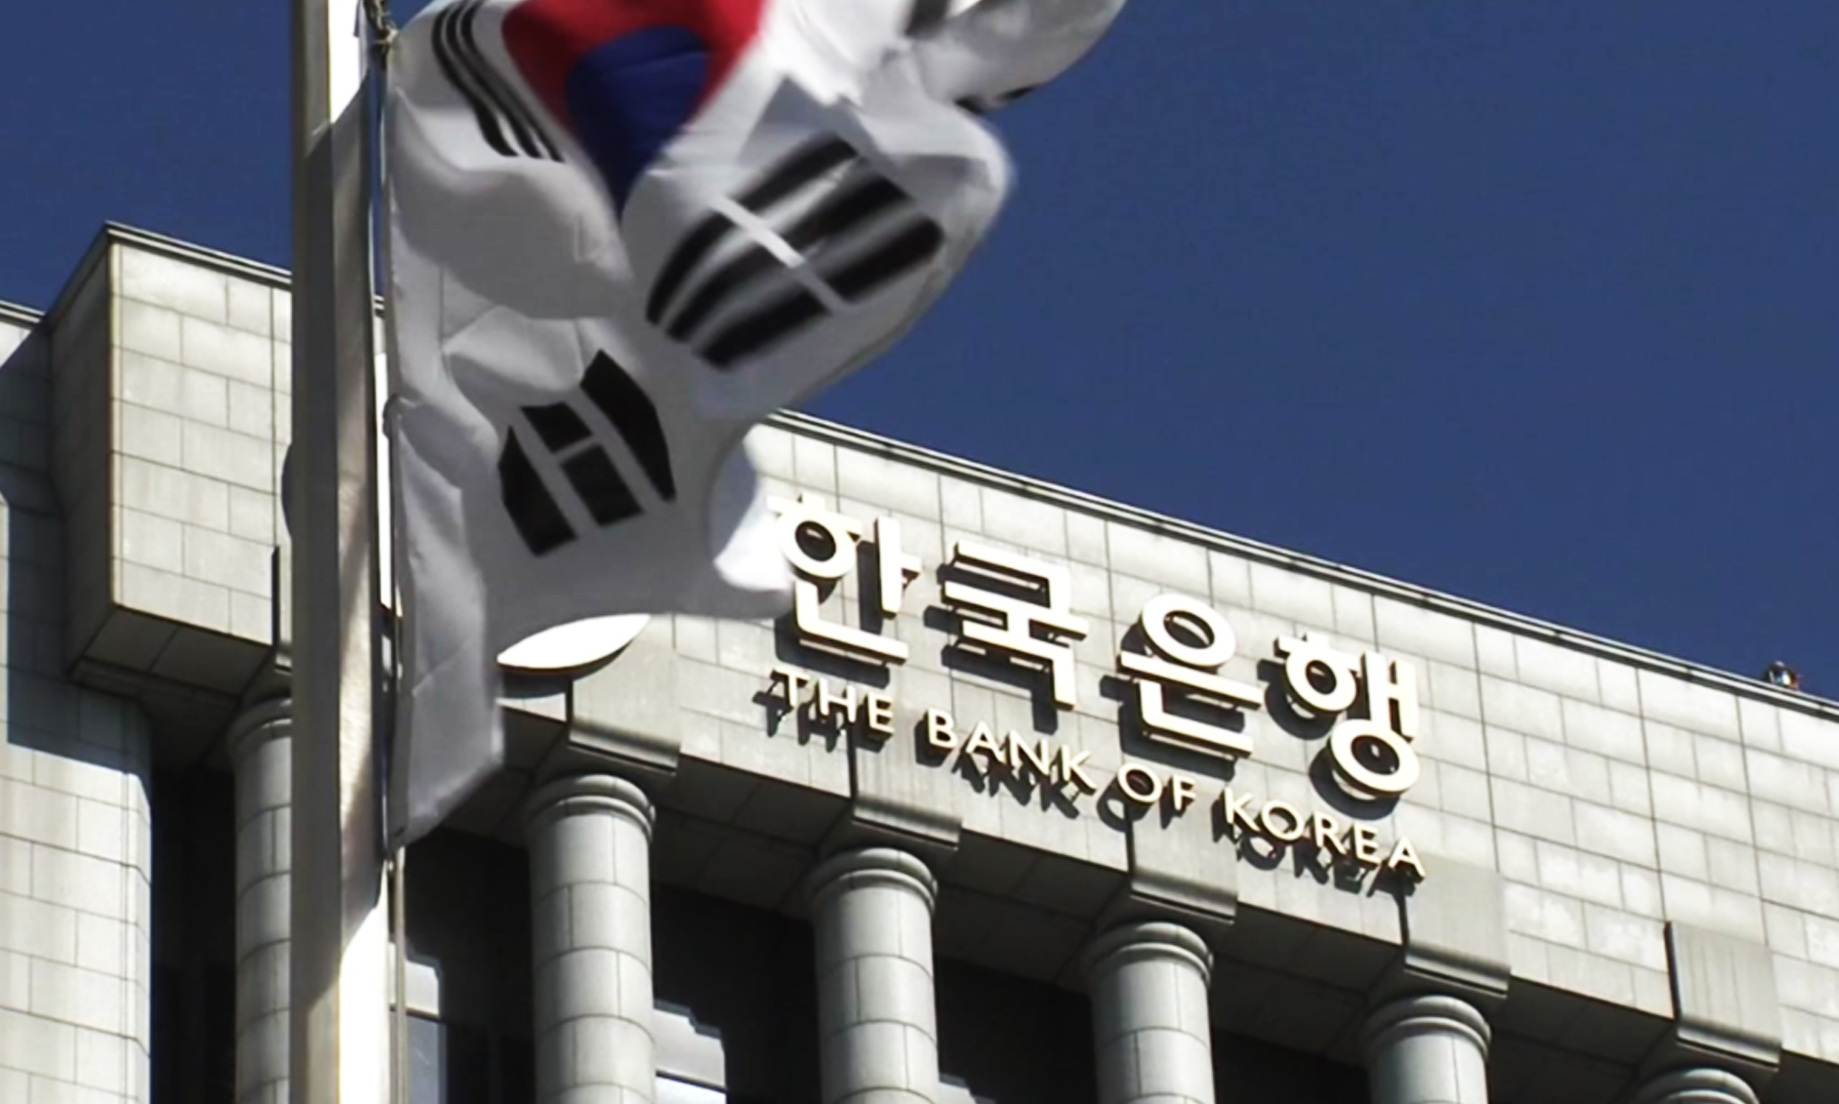 South Korea’s central bank lowers interest rate for first time in 3 years